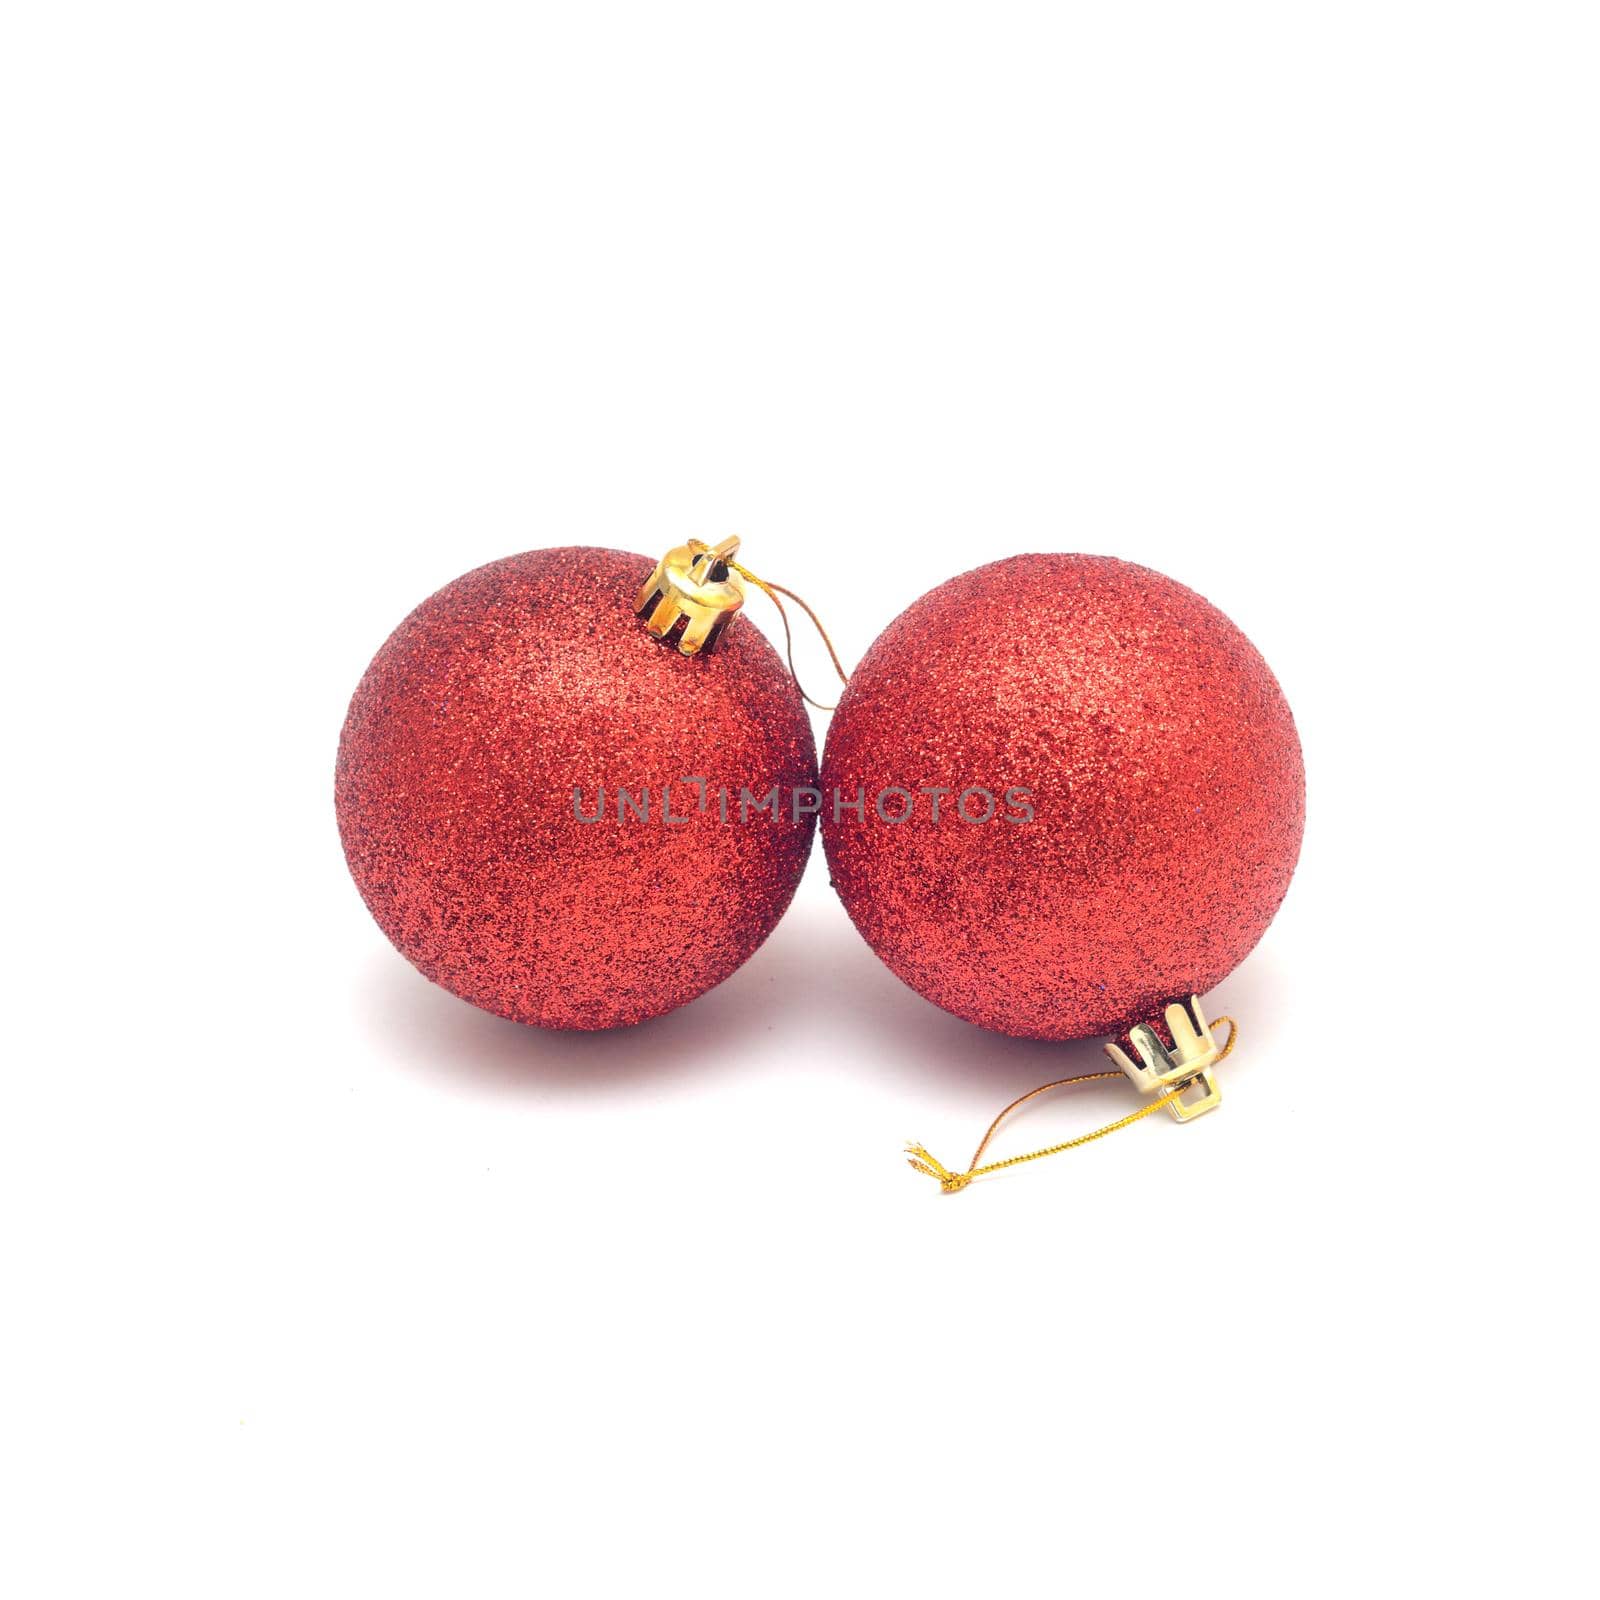 Two red Christmas balls isolated on a white background